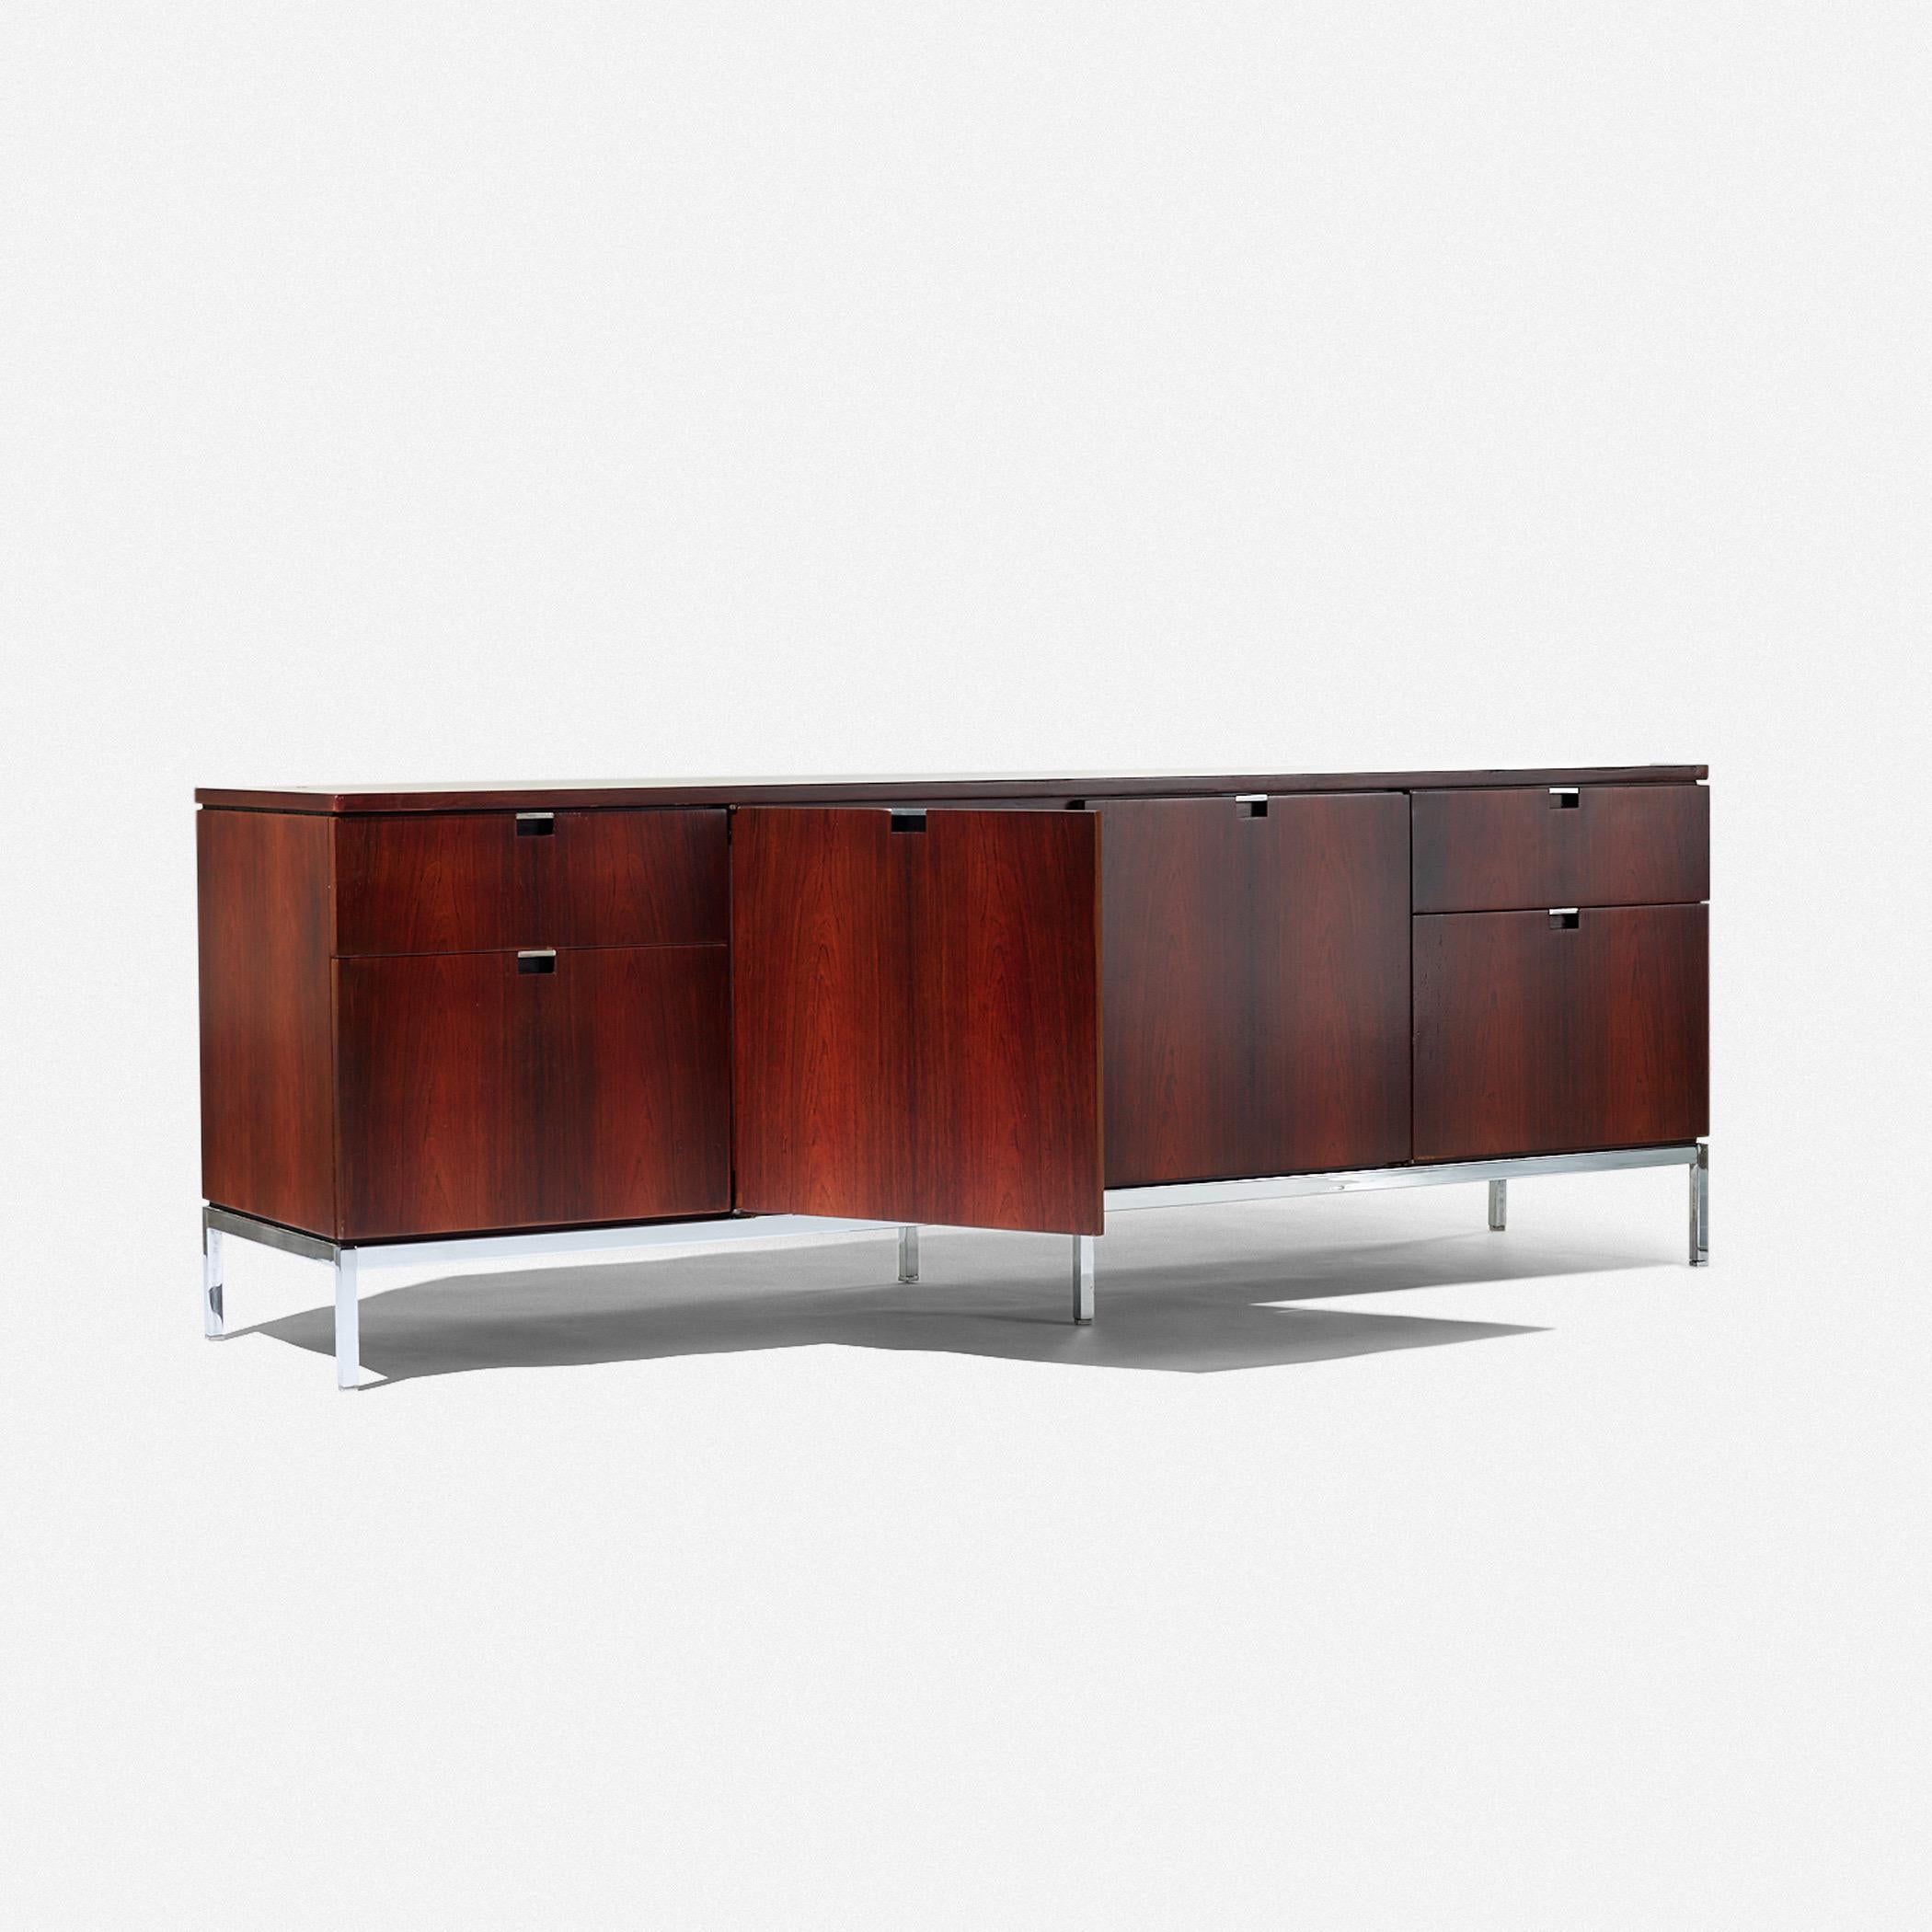 Florence Knoll rosewood cabinet

Chrome plated steel base

Measures: 74.5” Length x 18” depth x 26” height

In good vintage condition structurally sound 

Veneer refinished

Lock does not function.
 